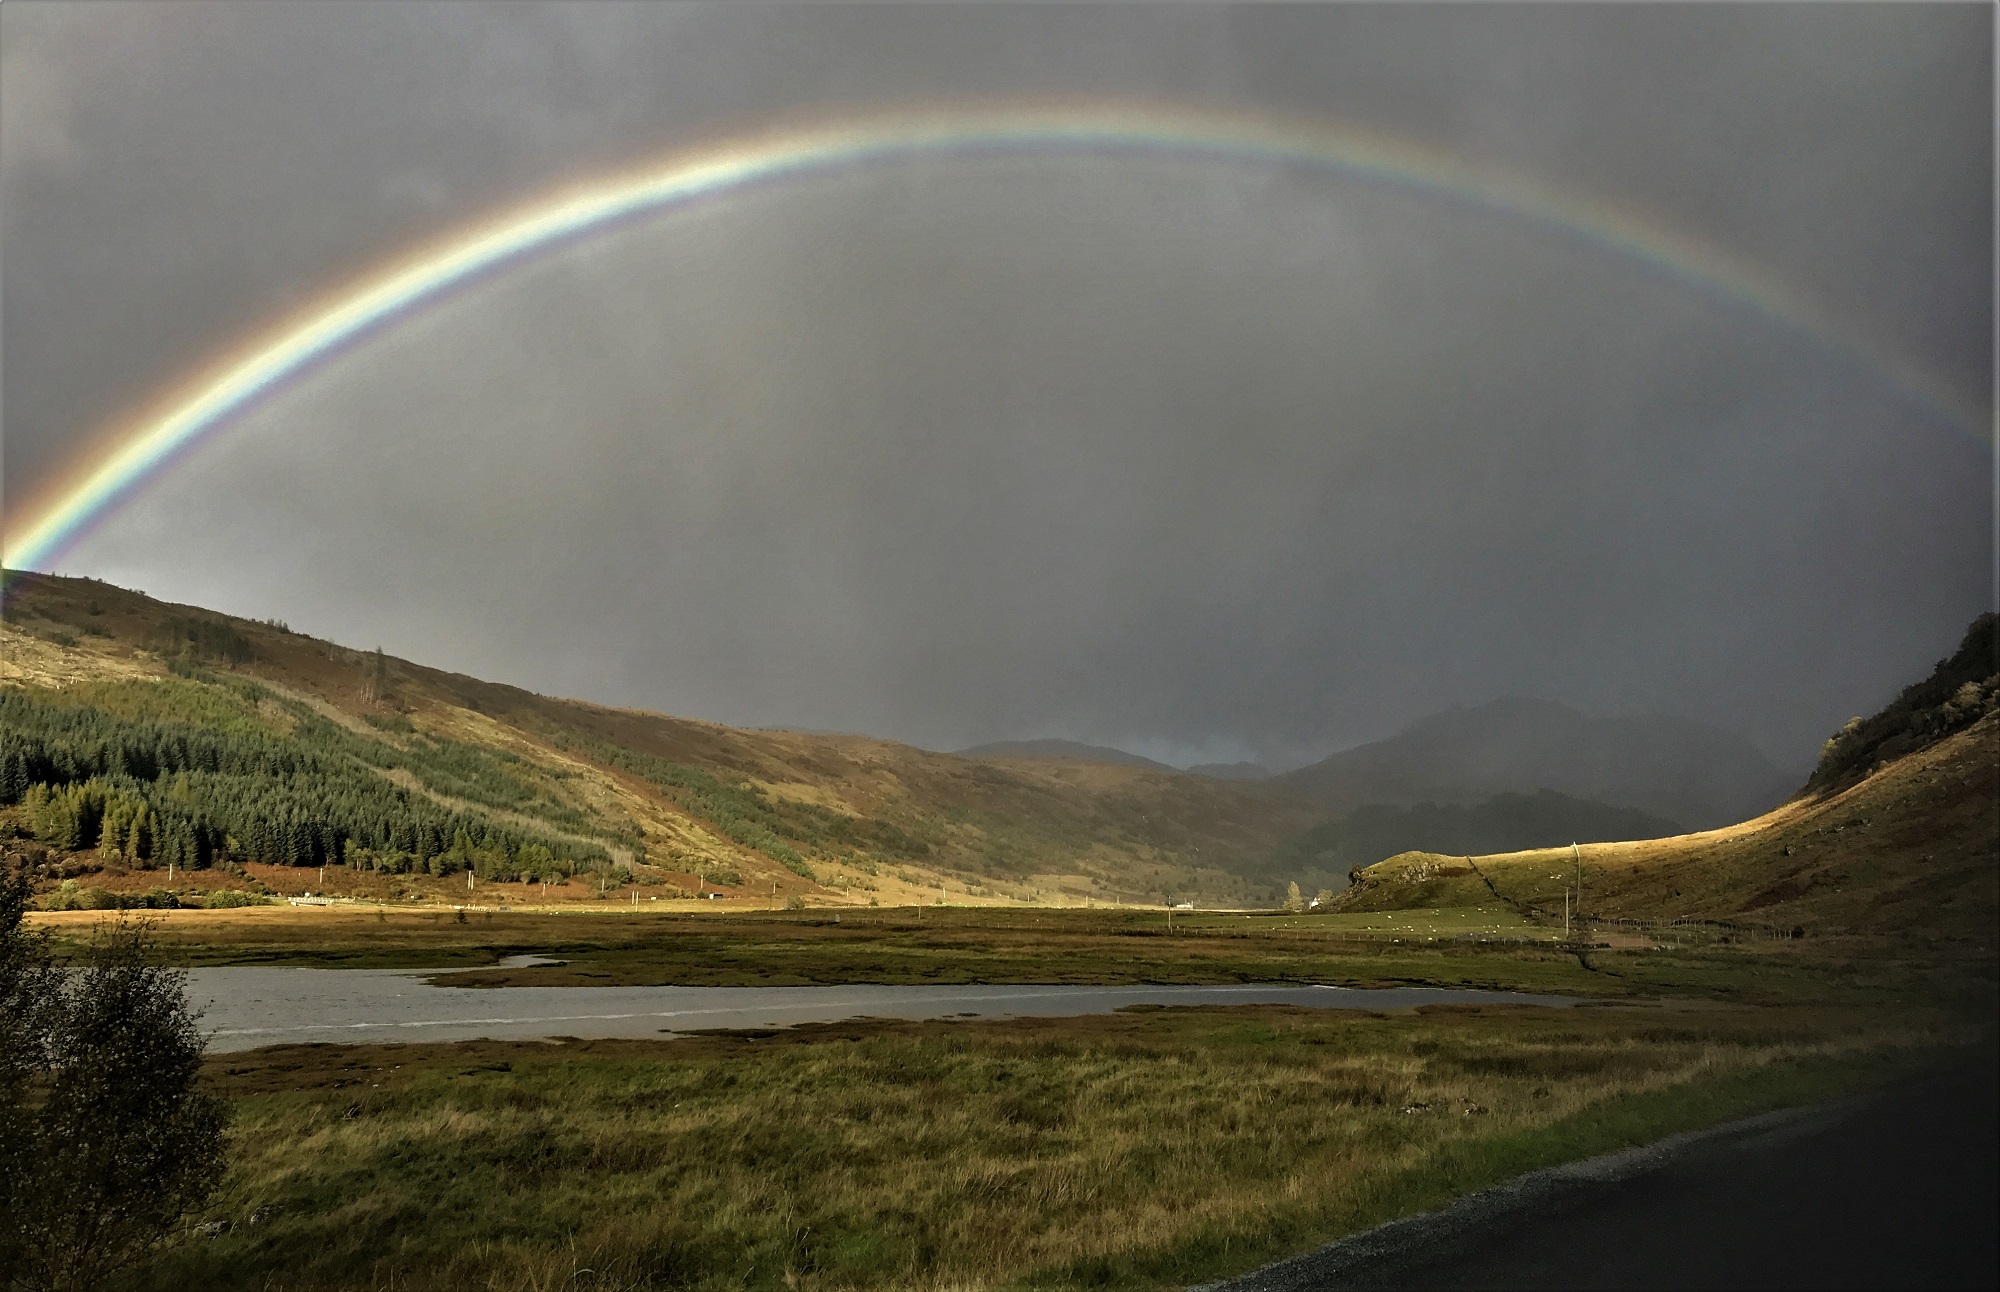 Photos from our Highlands and Islands Cycling Holiday